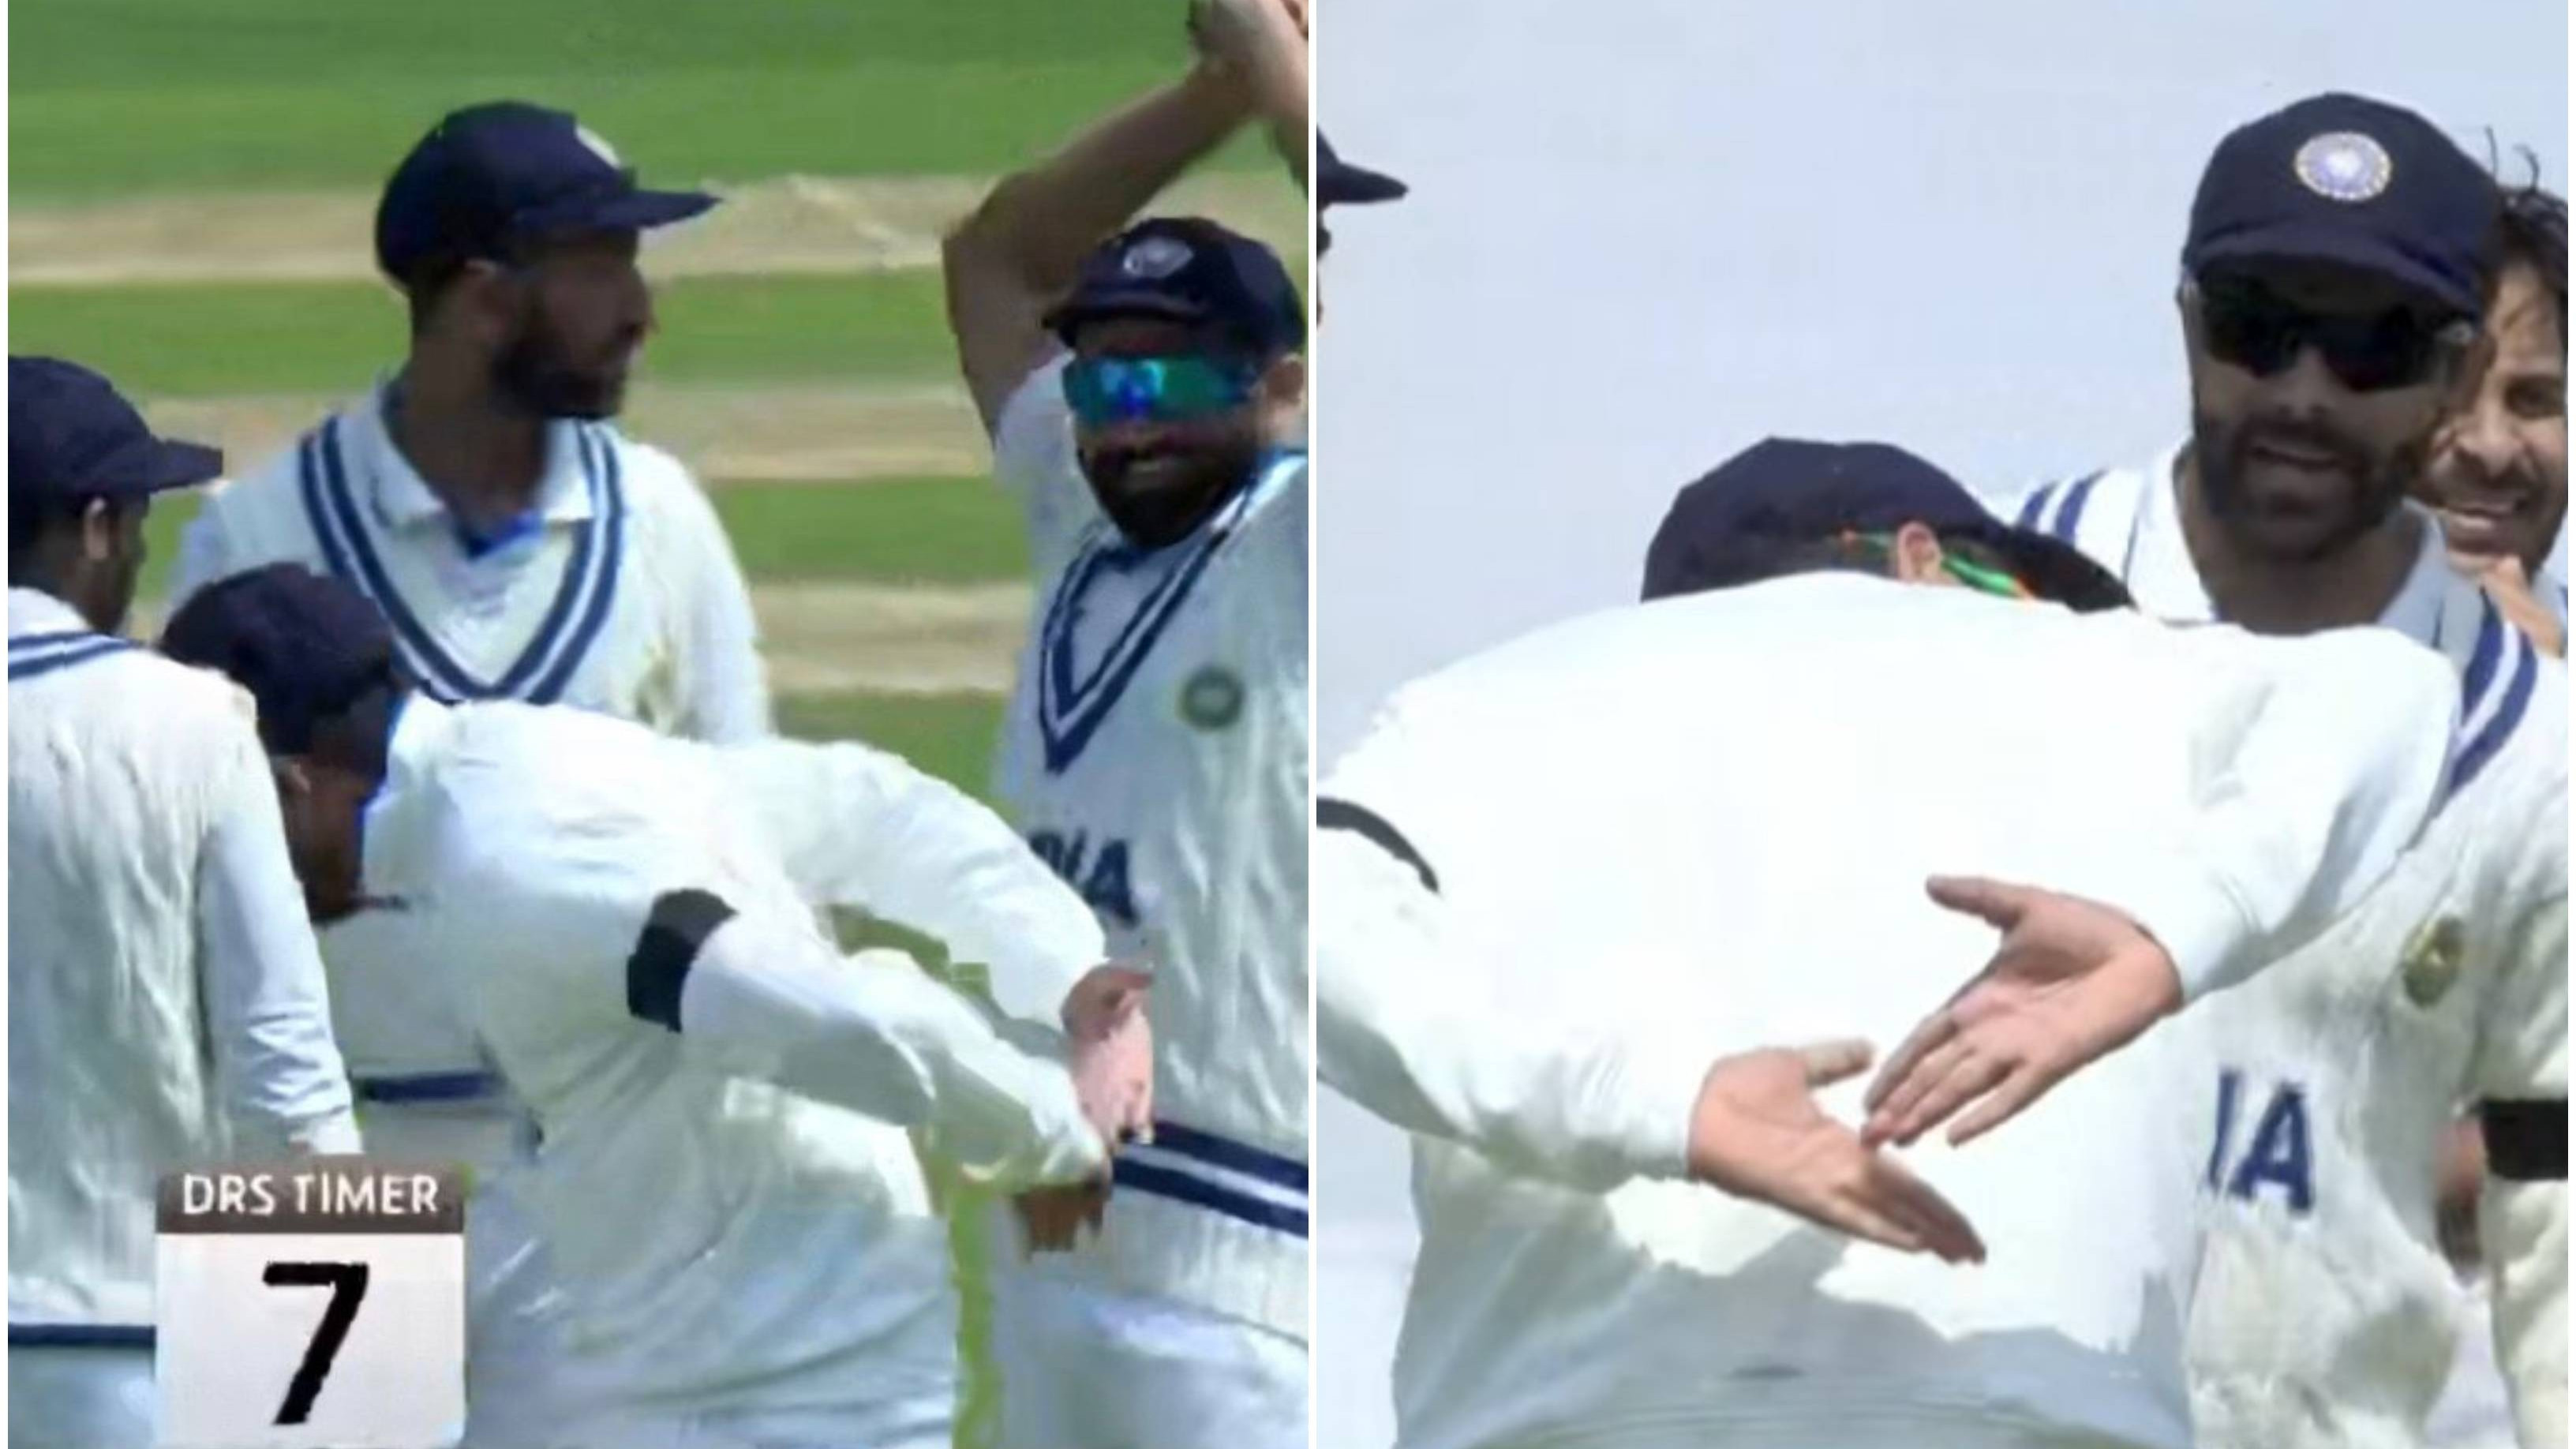 WTC 2023 Final: WATCH – Rohit Sharma’s hilarious no-look gesture to umpire for DRS as India look for a breakthrough